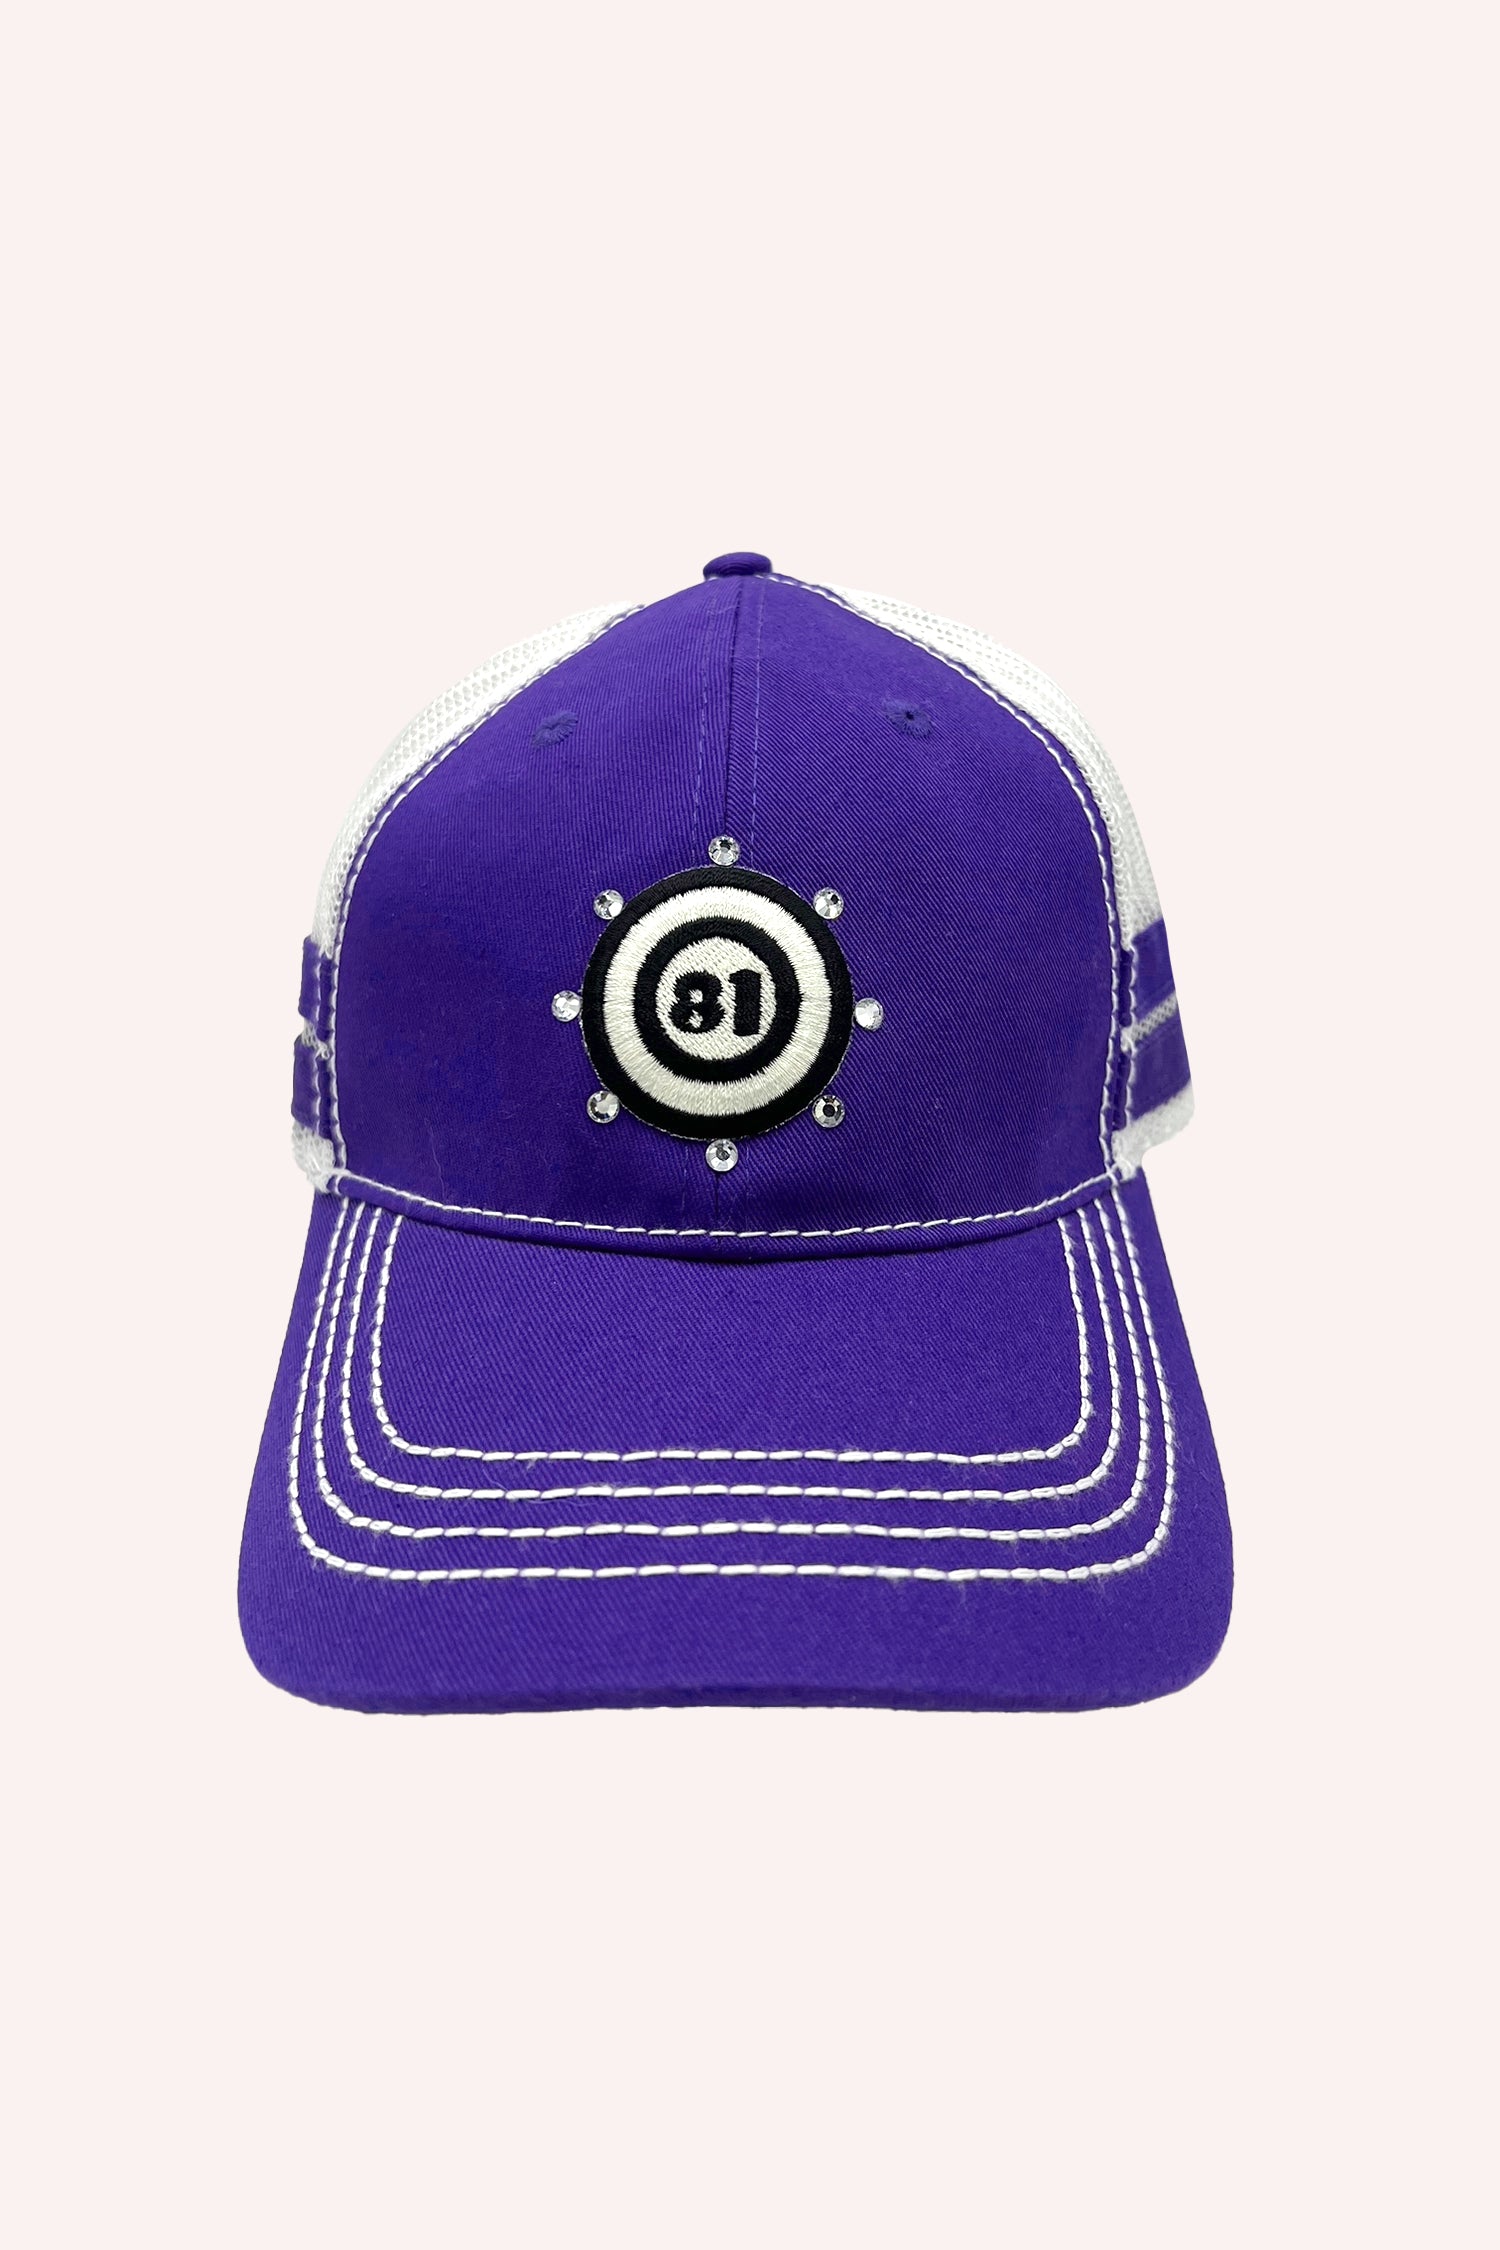 81 Trucker Hat Purple, mesh on the back, label in a black/white round target, 8-clear bead around